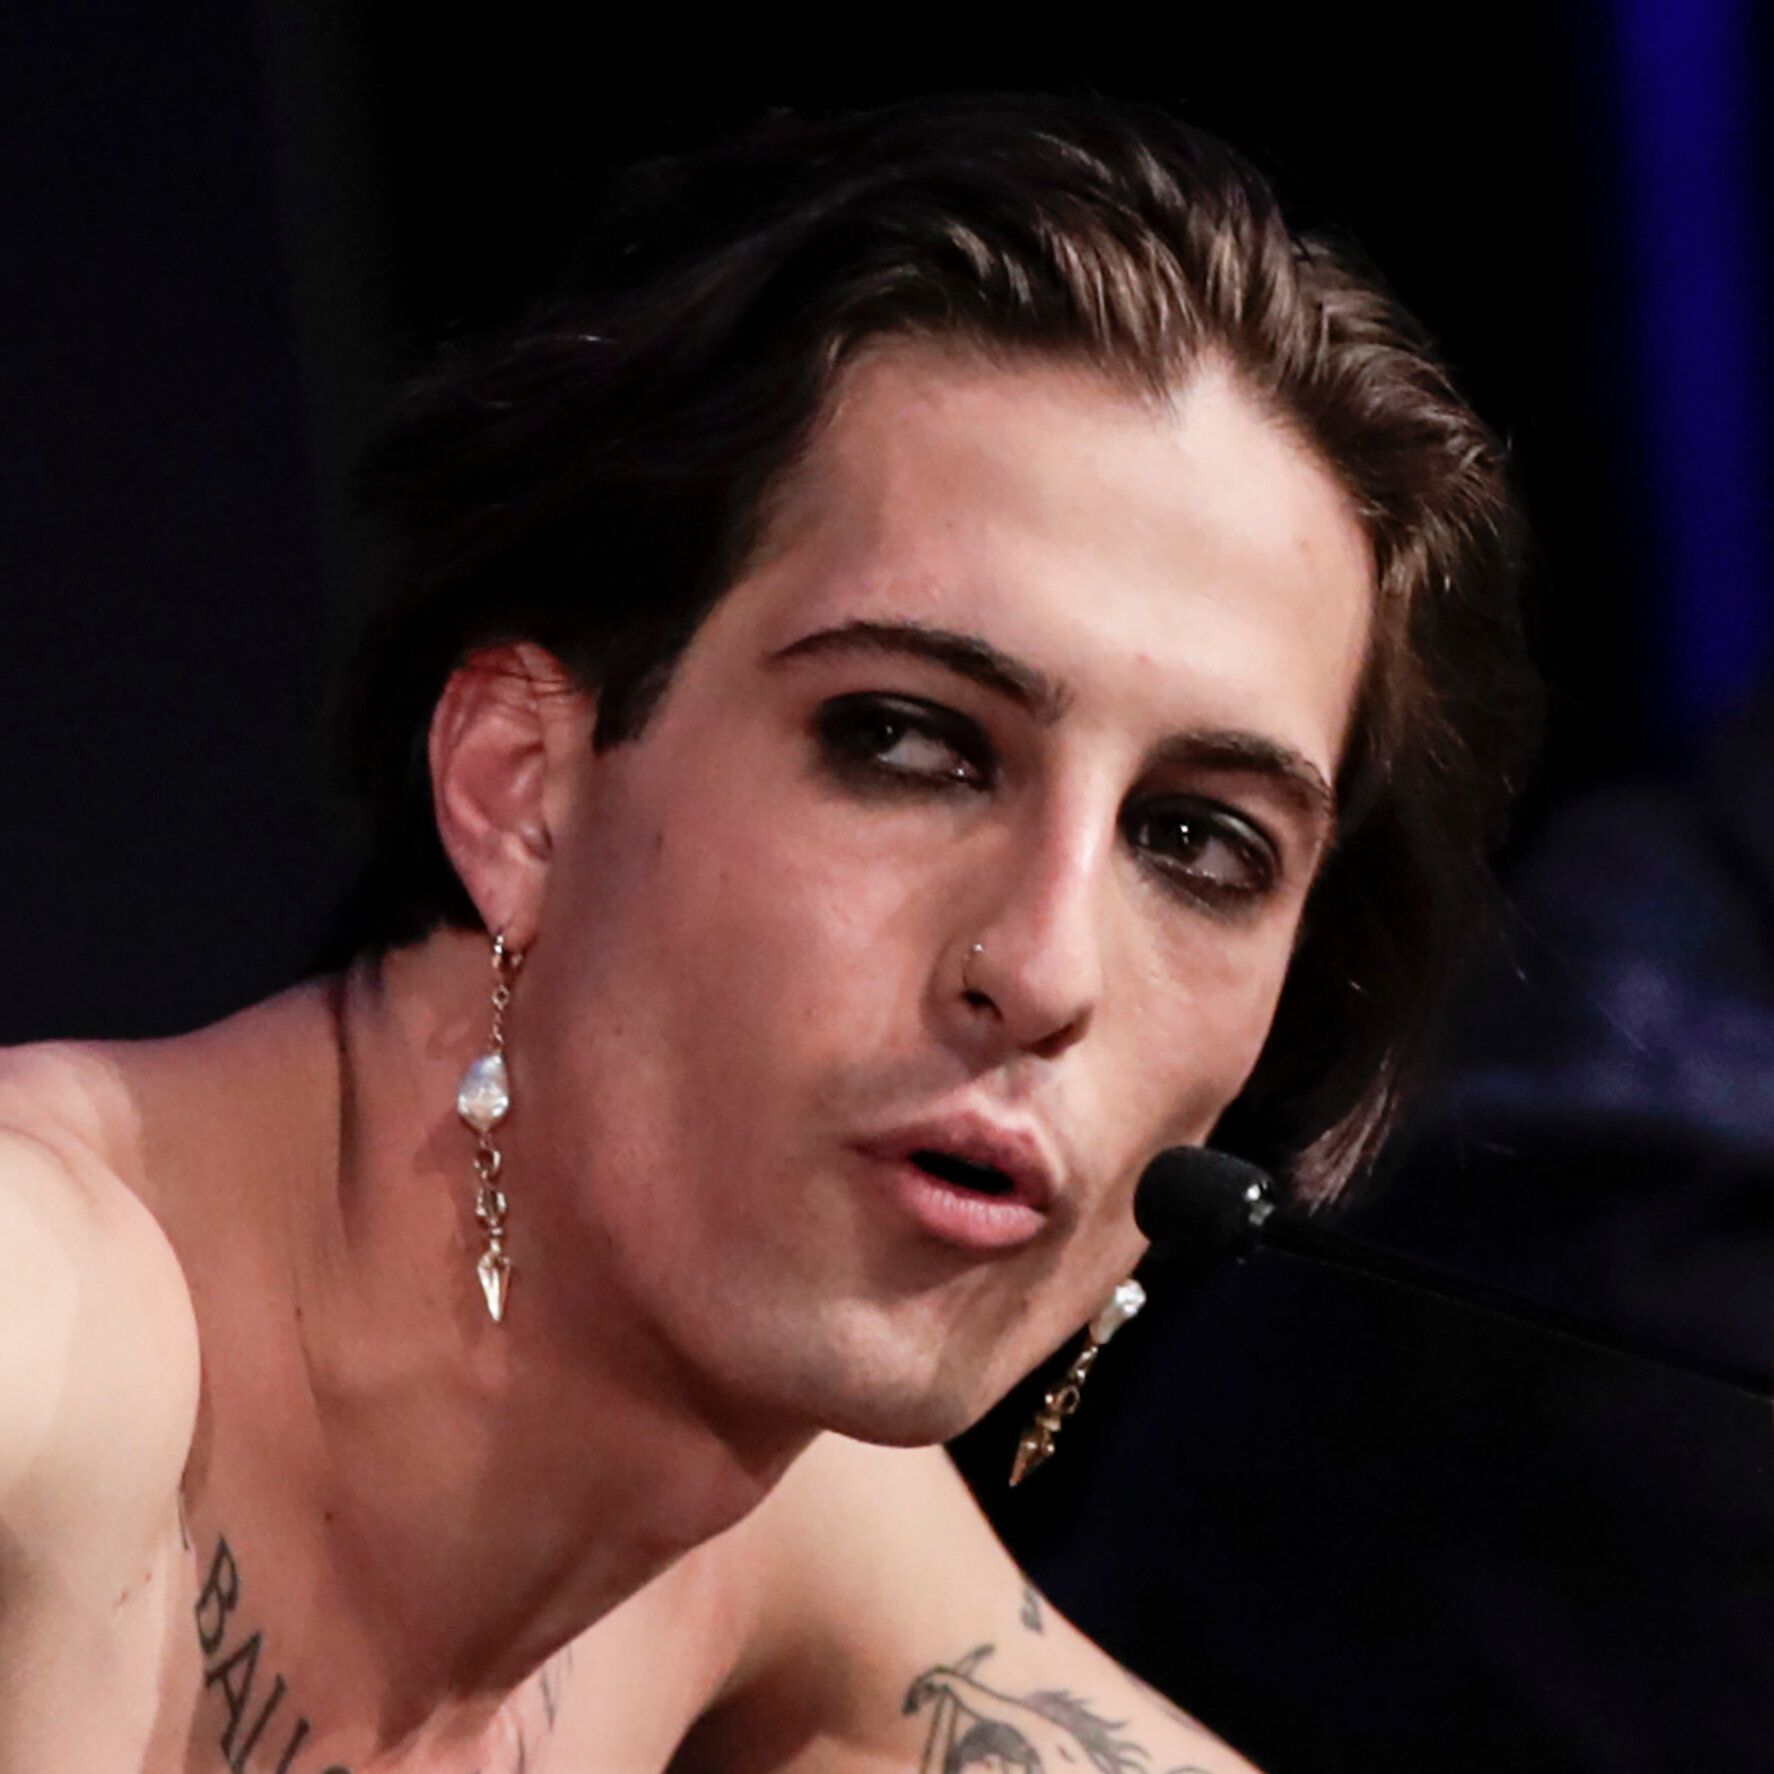 Maneskin Did Not Use Drugs at Eurovision, Broadcaster Says